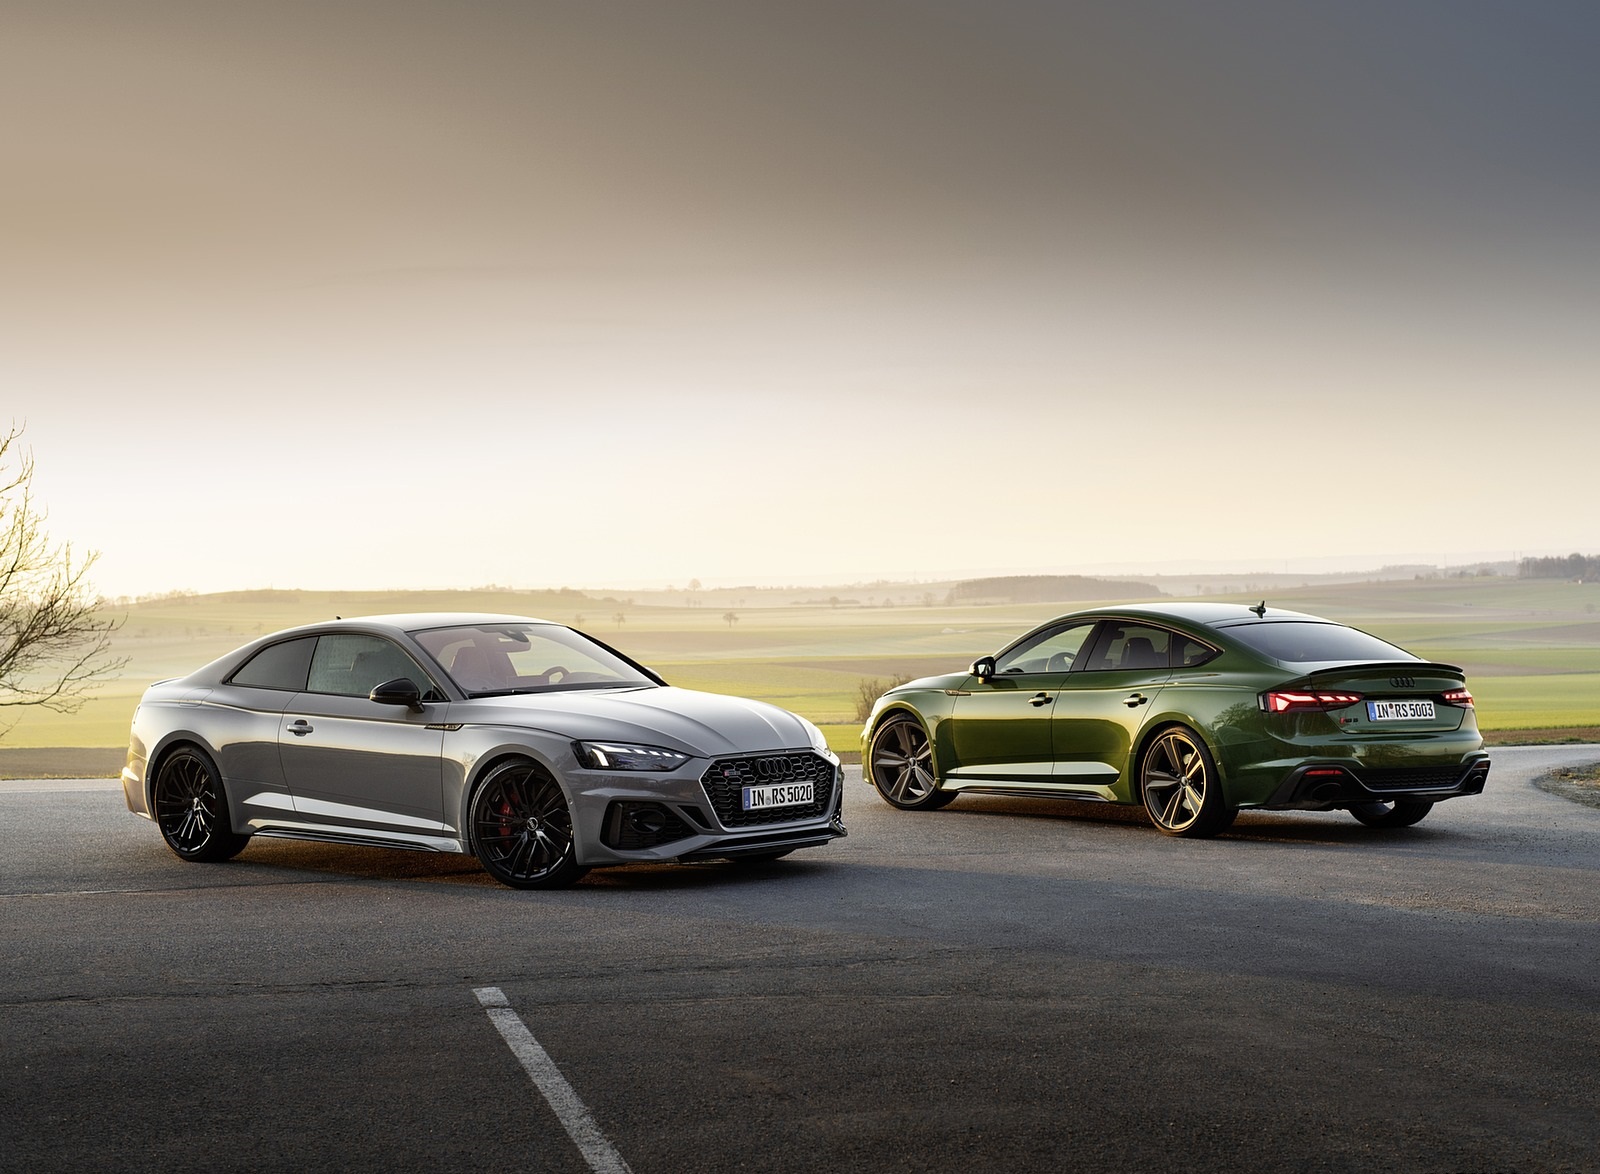 2020 Audi RS 5 Sportback (Color: Sonoma Green) Wallpapers #17 of 76